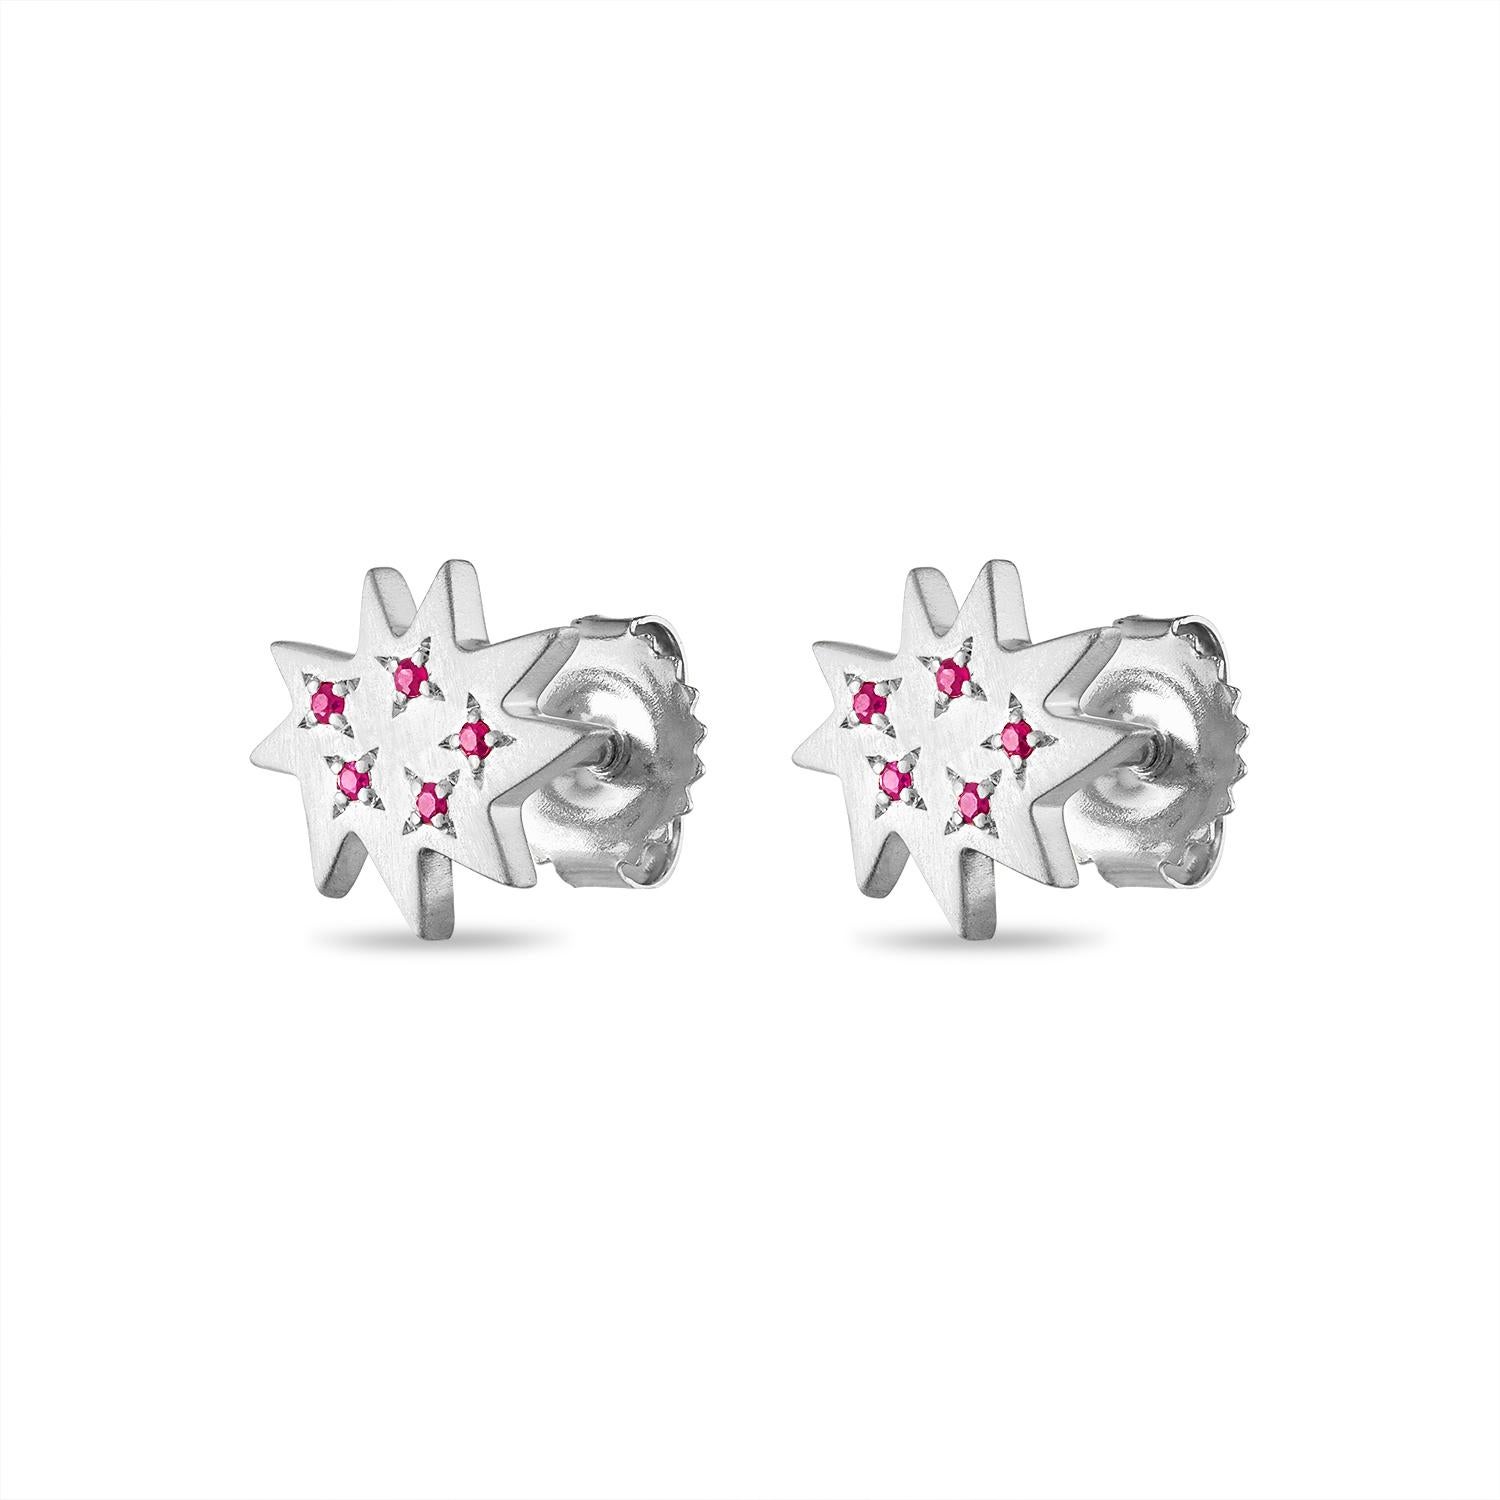 Perfect everyday earrings! Our new Mini Stella Studs go from morning to night with ease. Our iconic  silver organic star in our delicate mini size flatters everyone and adds a touch of sparkle with five tiny rubies on each stud. And now through the